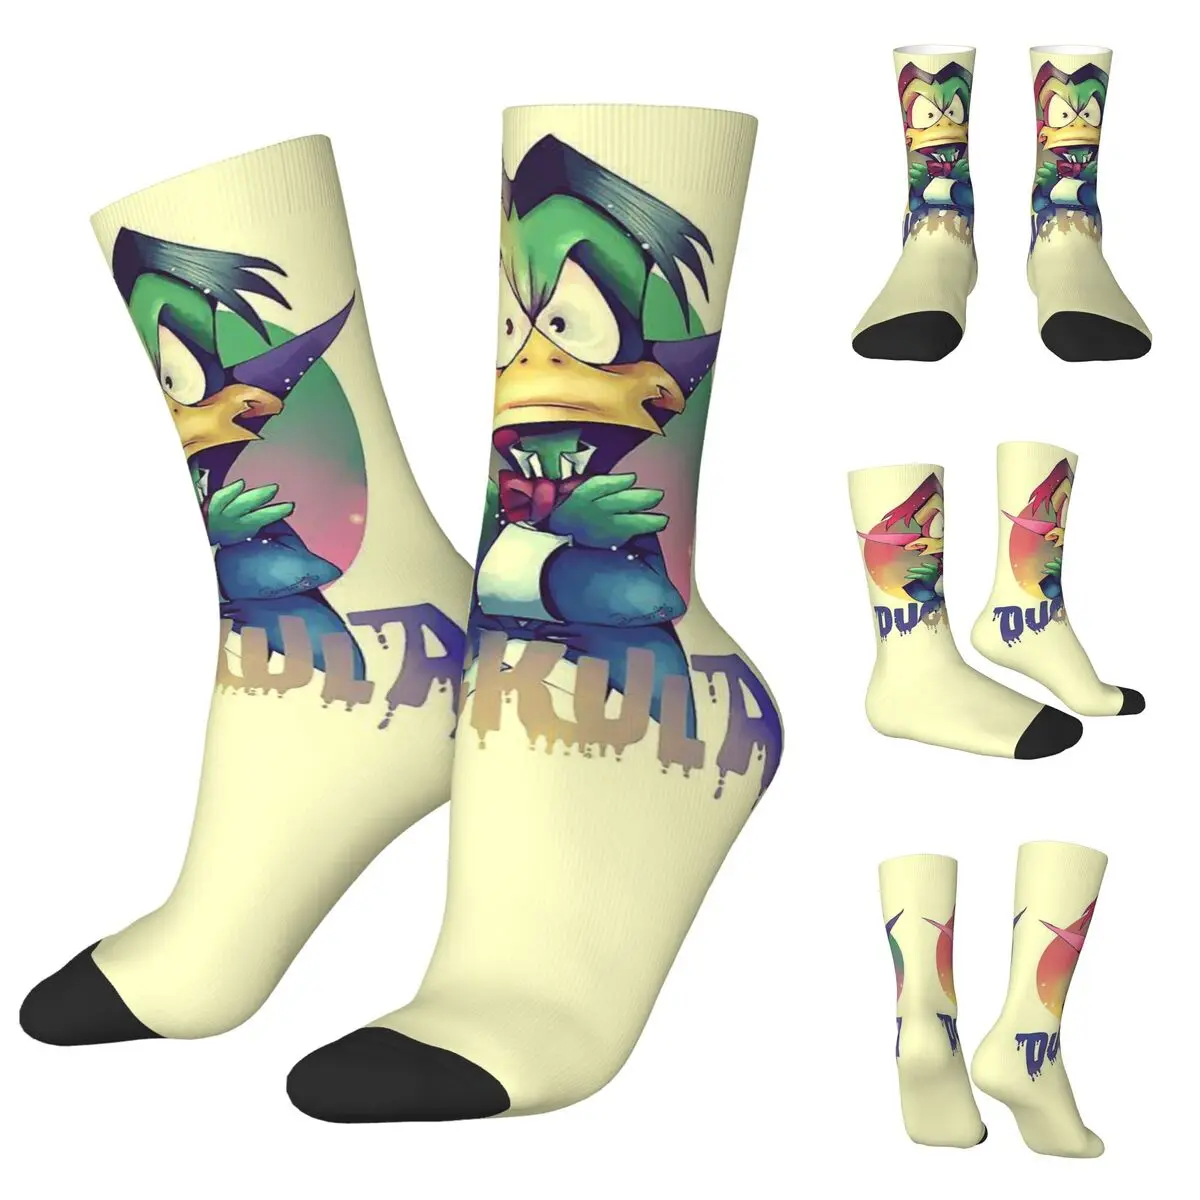 Count Duckula Vampire Lord The Castle Straight cosy Unisex Socks,Running Happy 3D printing Socks,Street Style Crazy Sock heroes del silencio unisex winter socks outdoor fun printing socks street style crazy sock